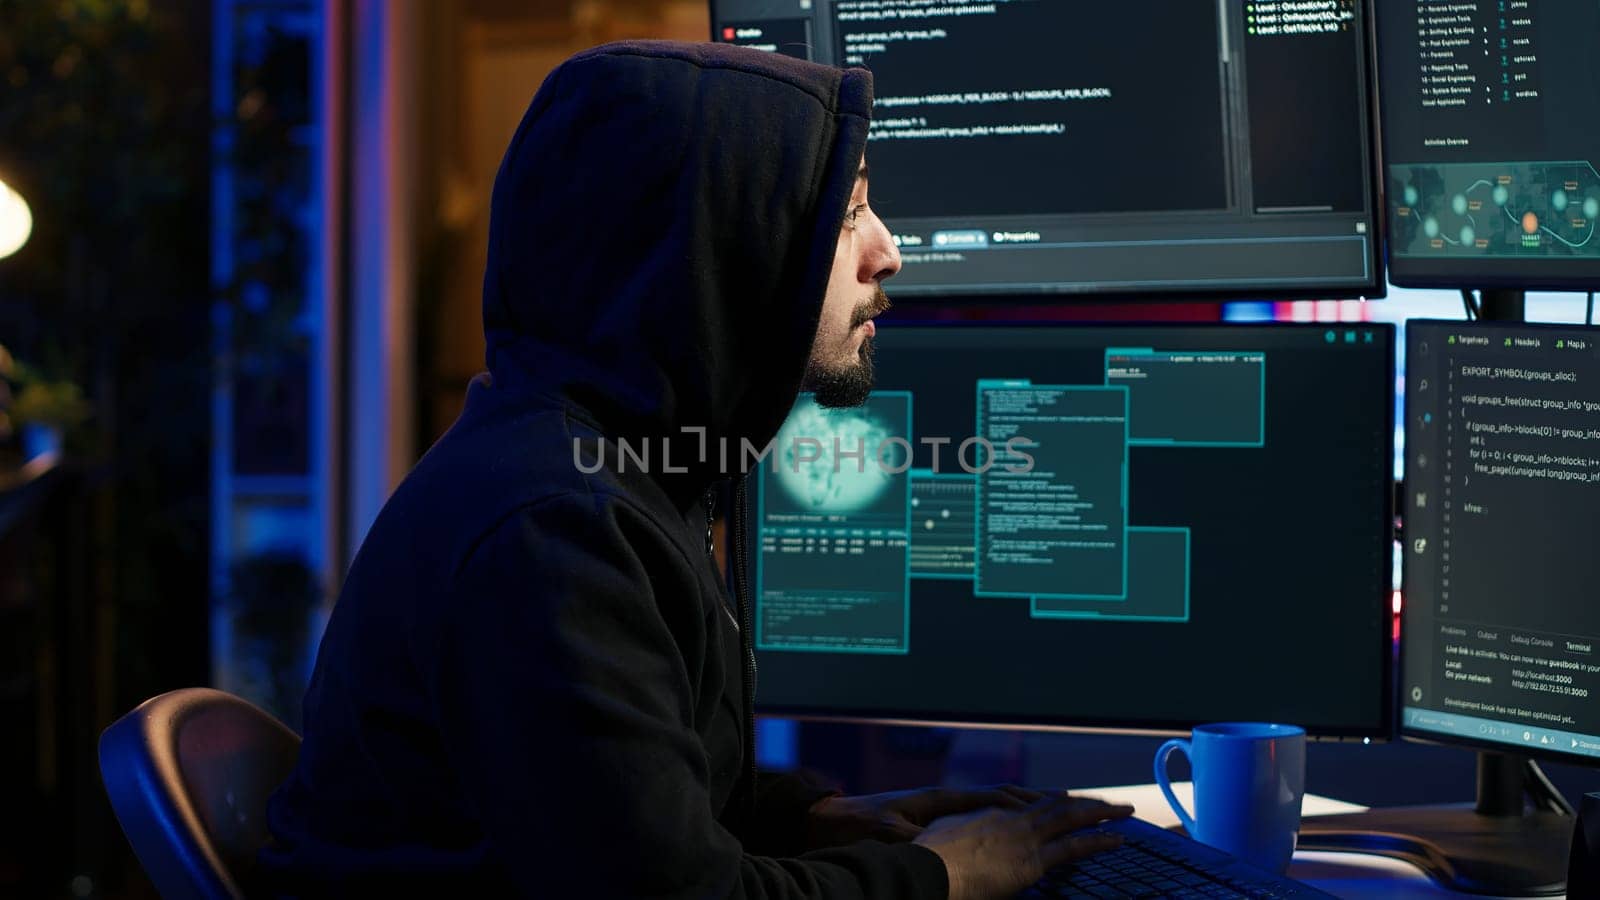 Hacker using PC to steal data, targeting unpatched security systems by DCStudio